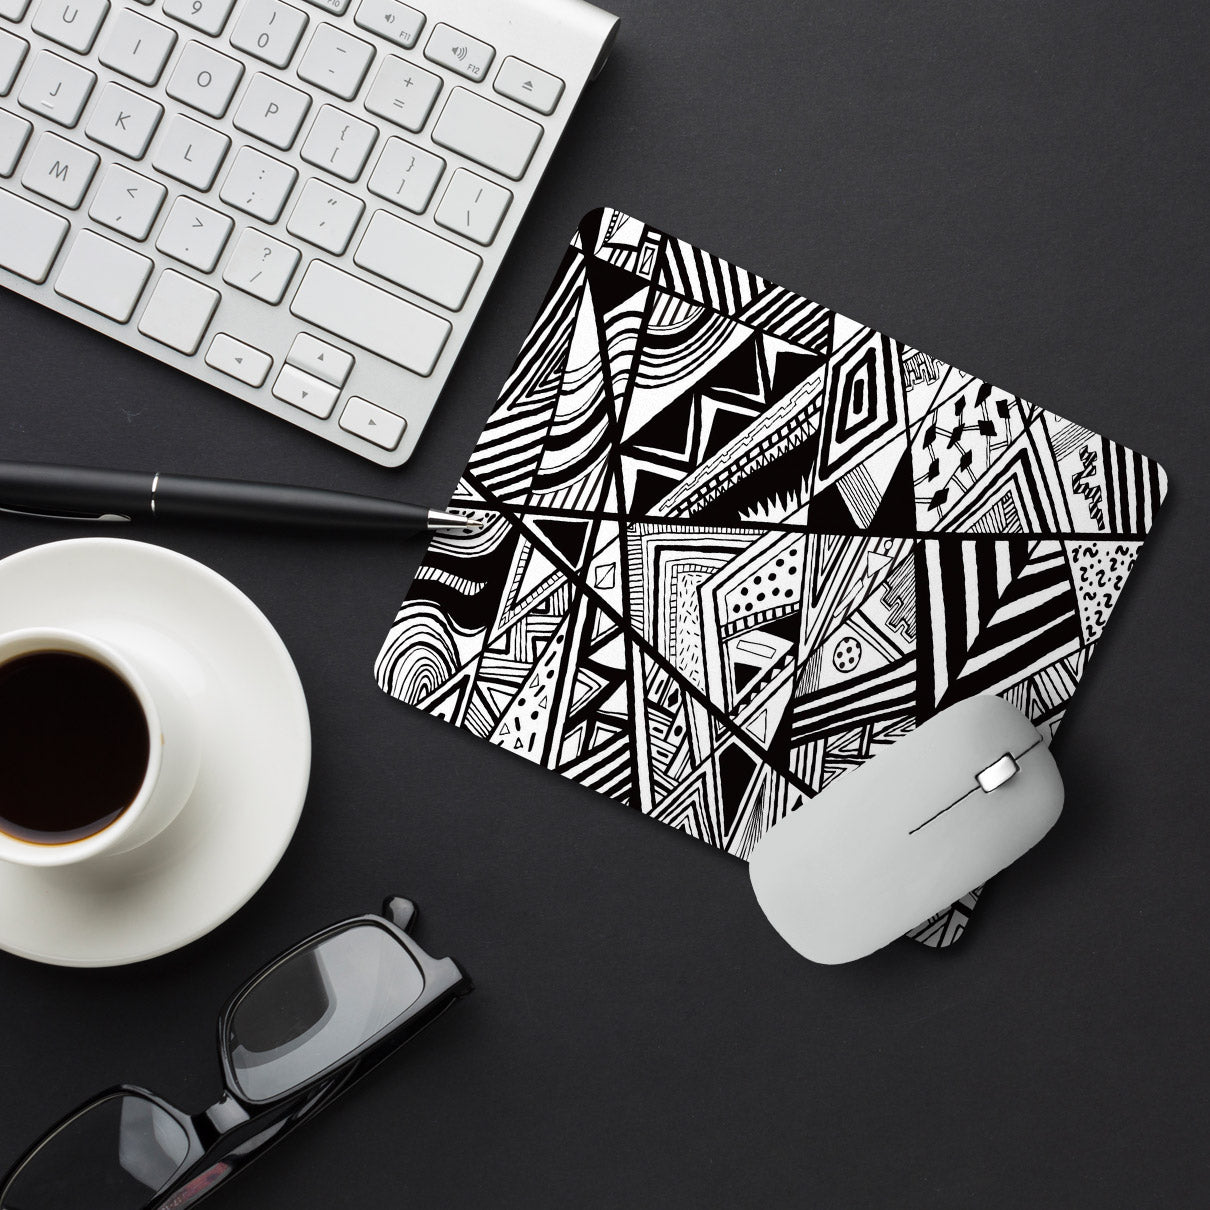 Abstract Black White Pattern Designer Printed Premium Mouse pad (9 in x 7.5 in)